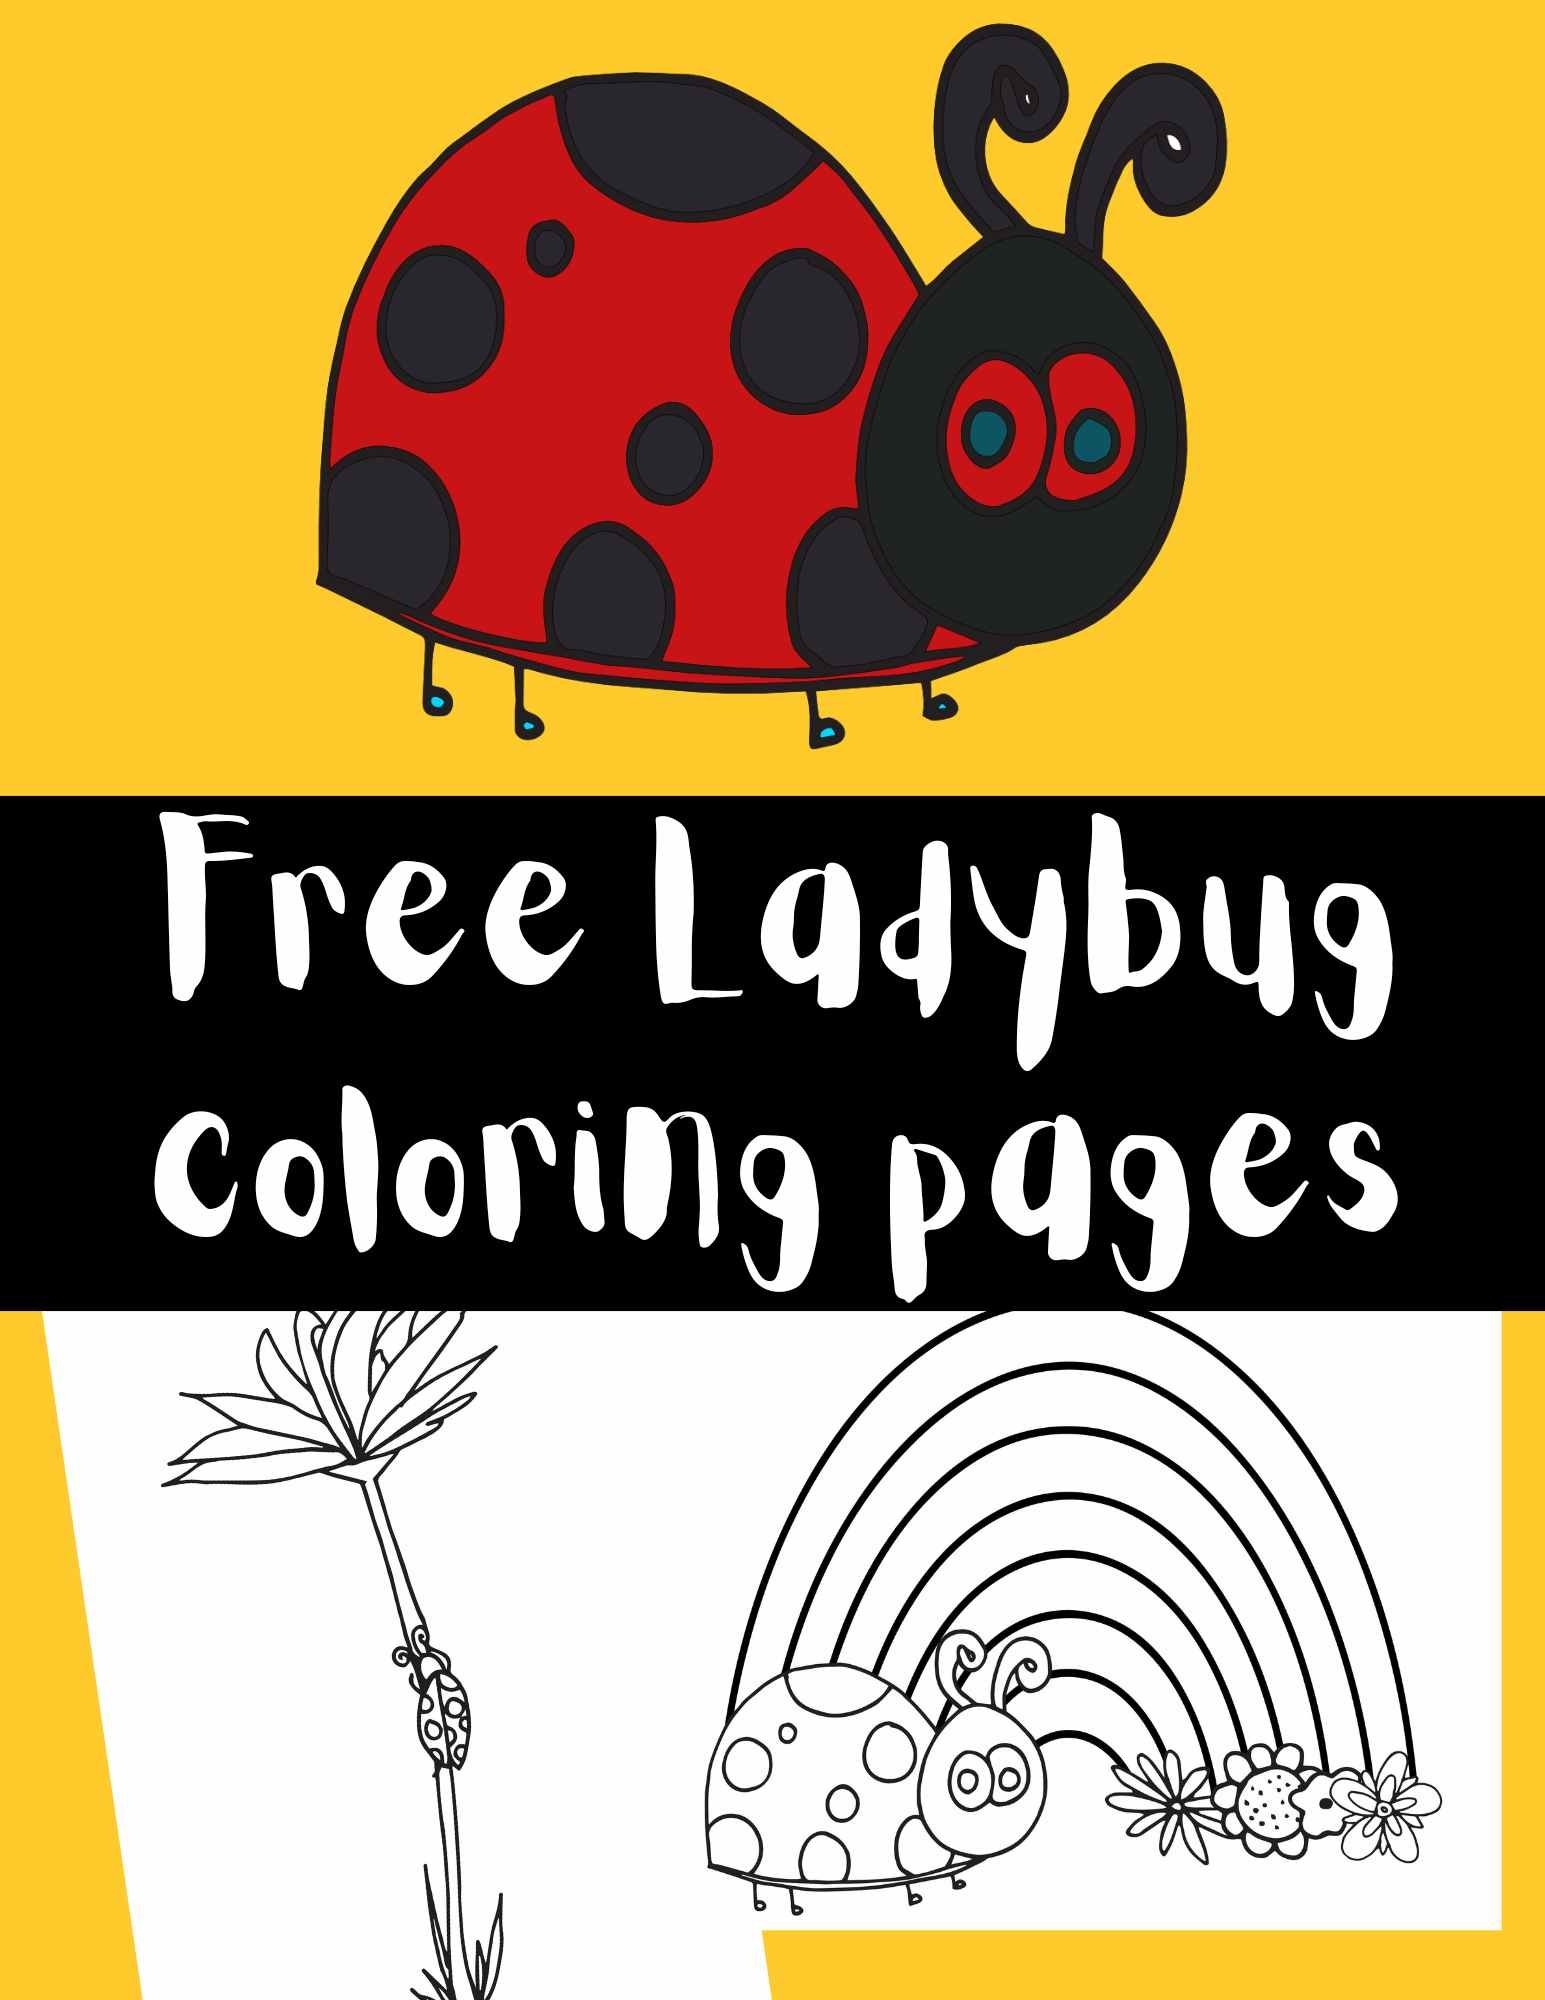 a collage of simple ladybug color pages